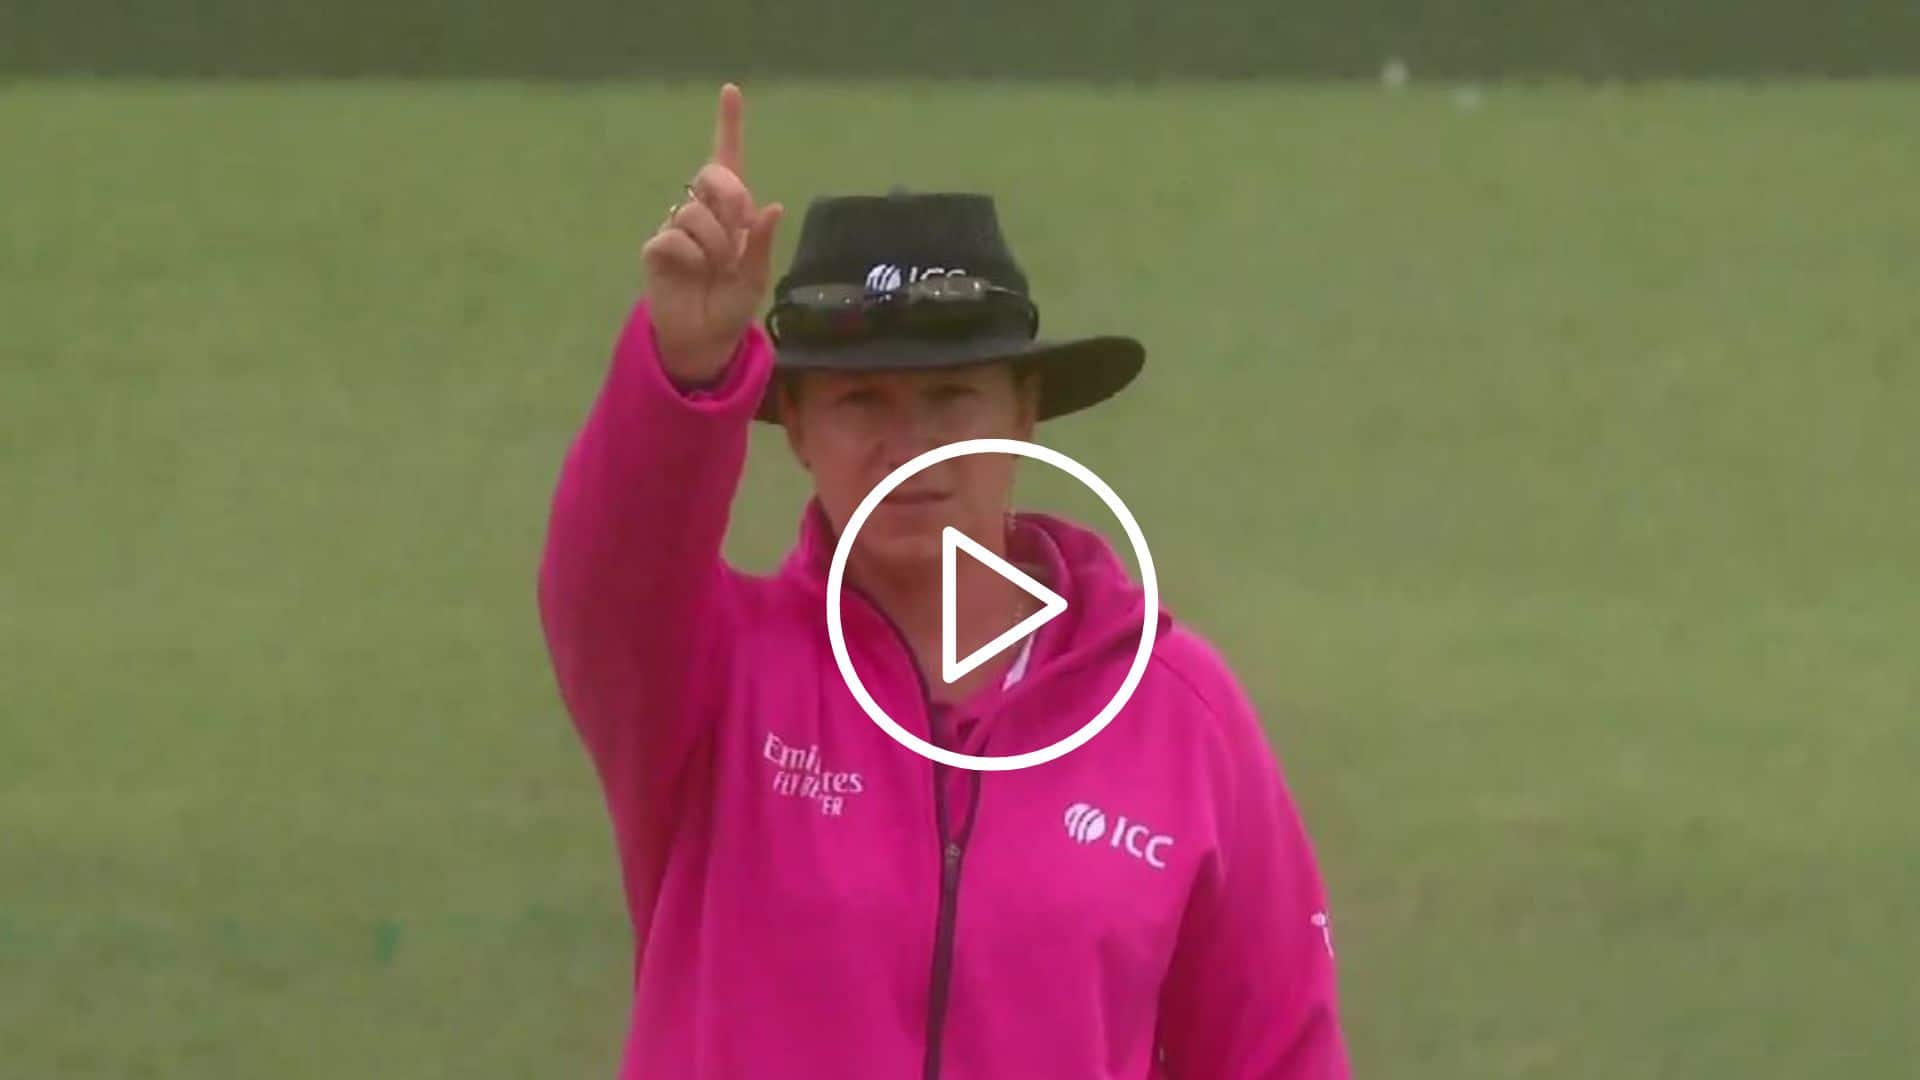 [Watch] Standing Umpire Gives Out Despite TV Umpire's Not Out Call In AUS-SA Women's ODI 